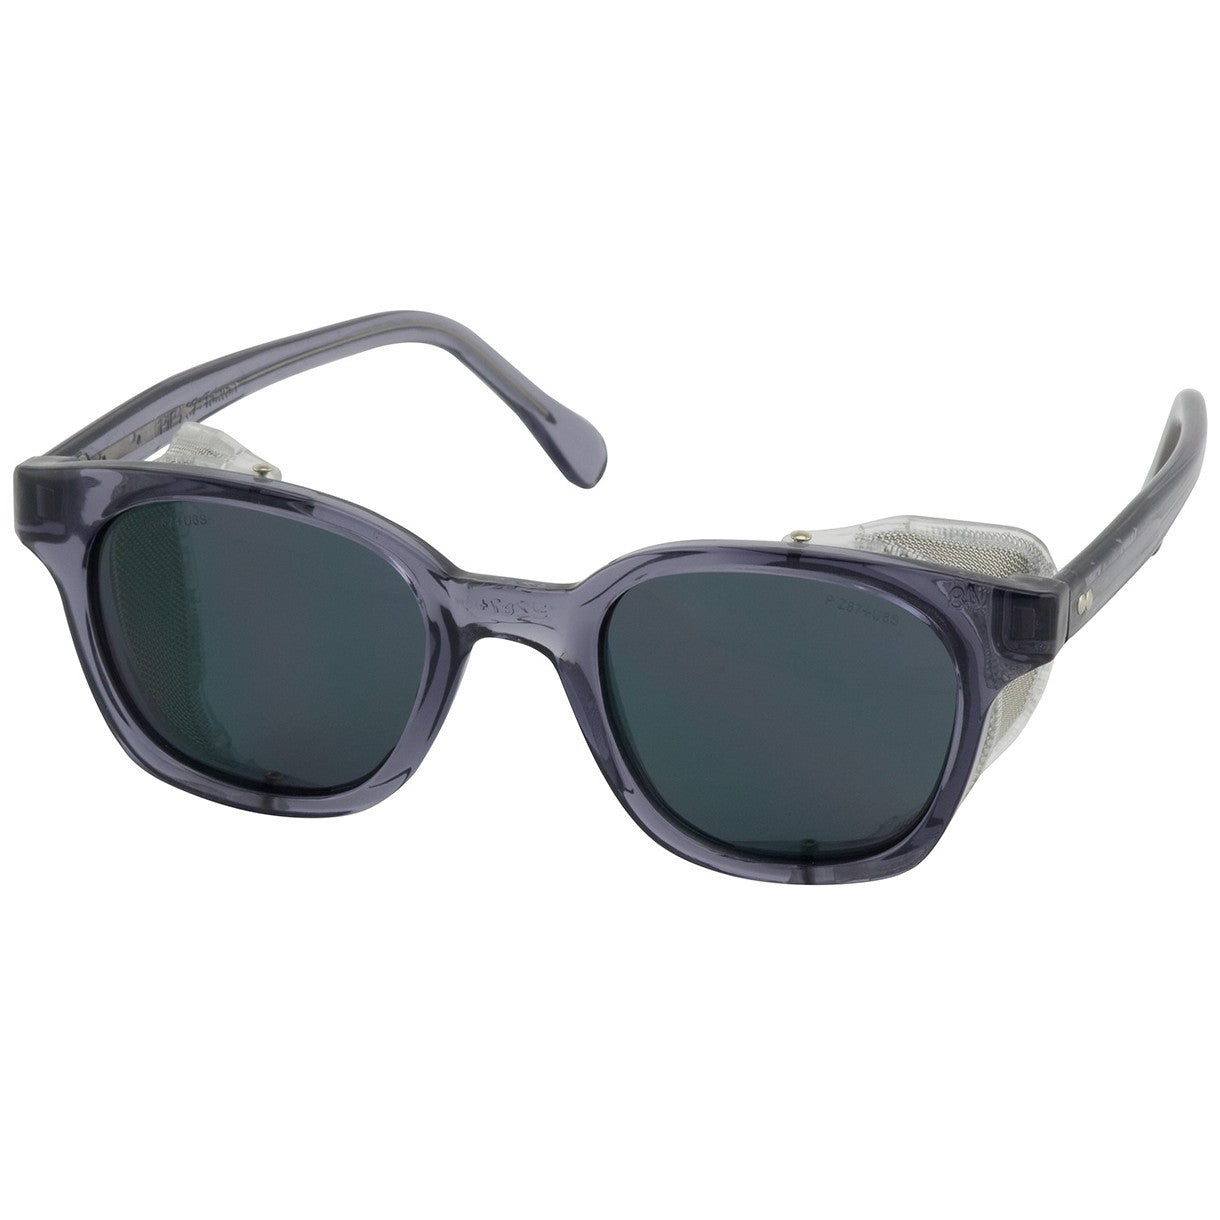 Traditional Safety Glasses - Gray Lens